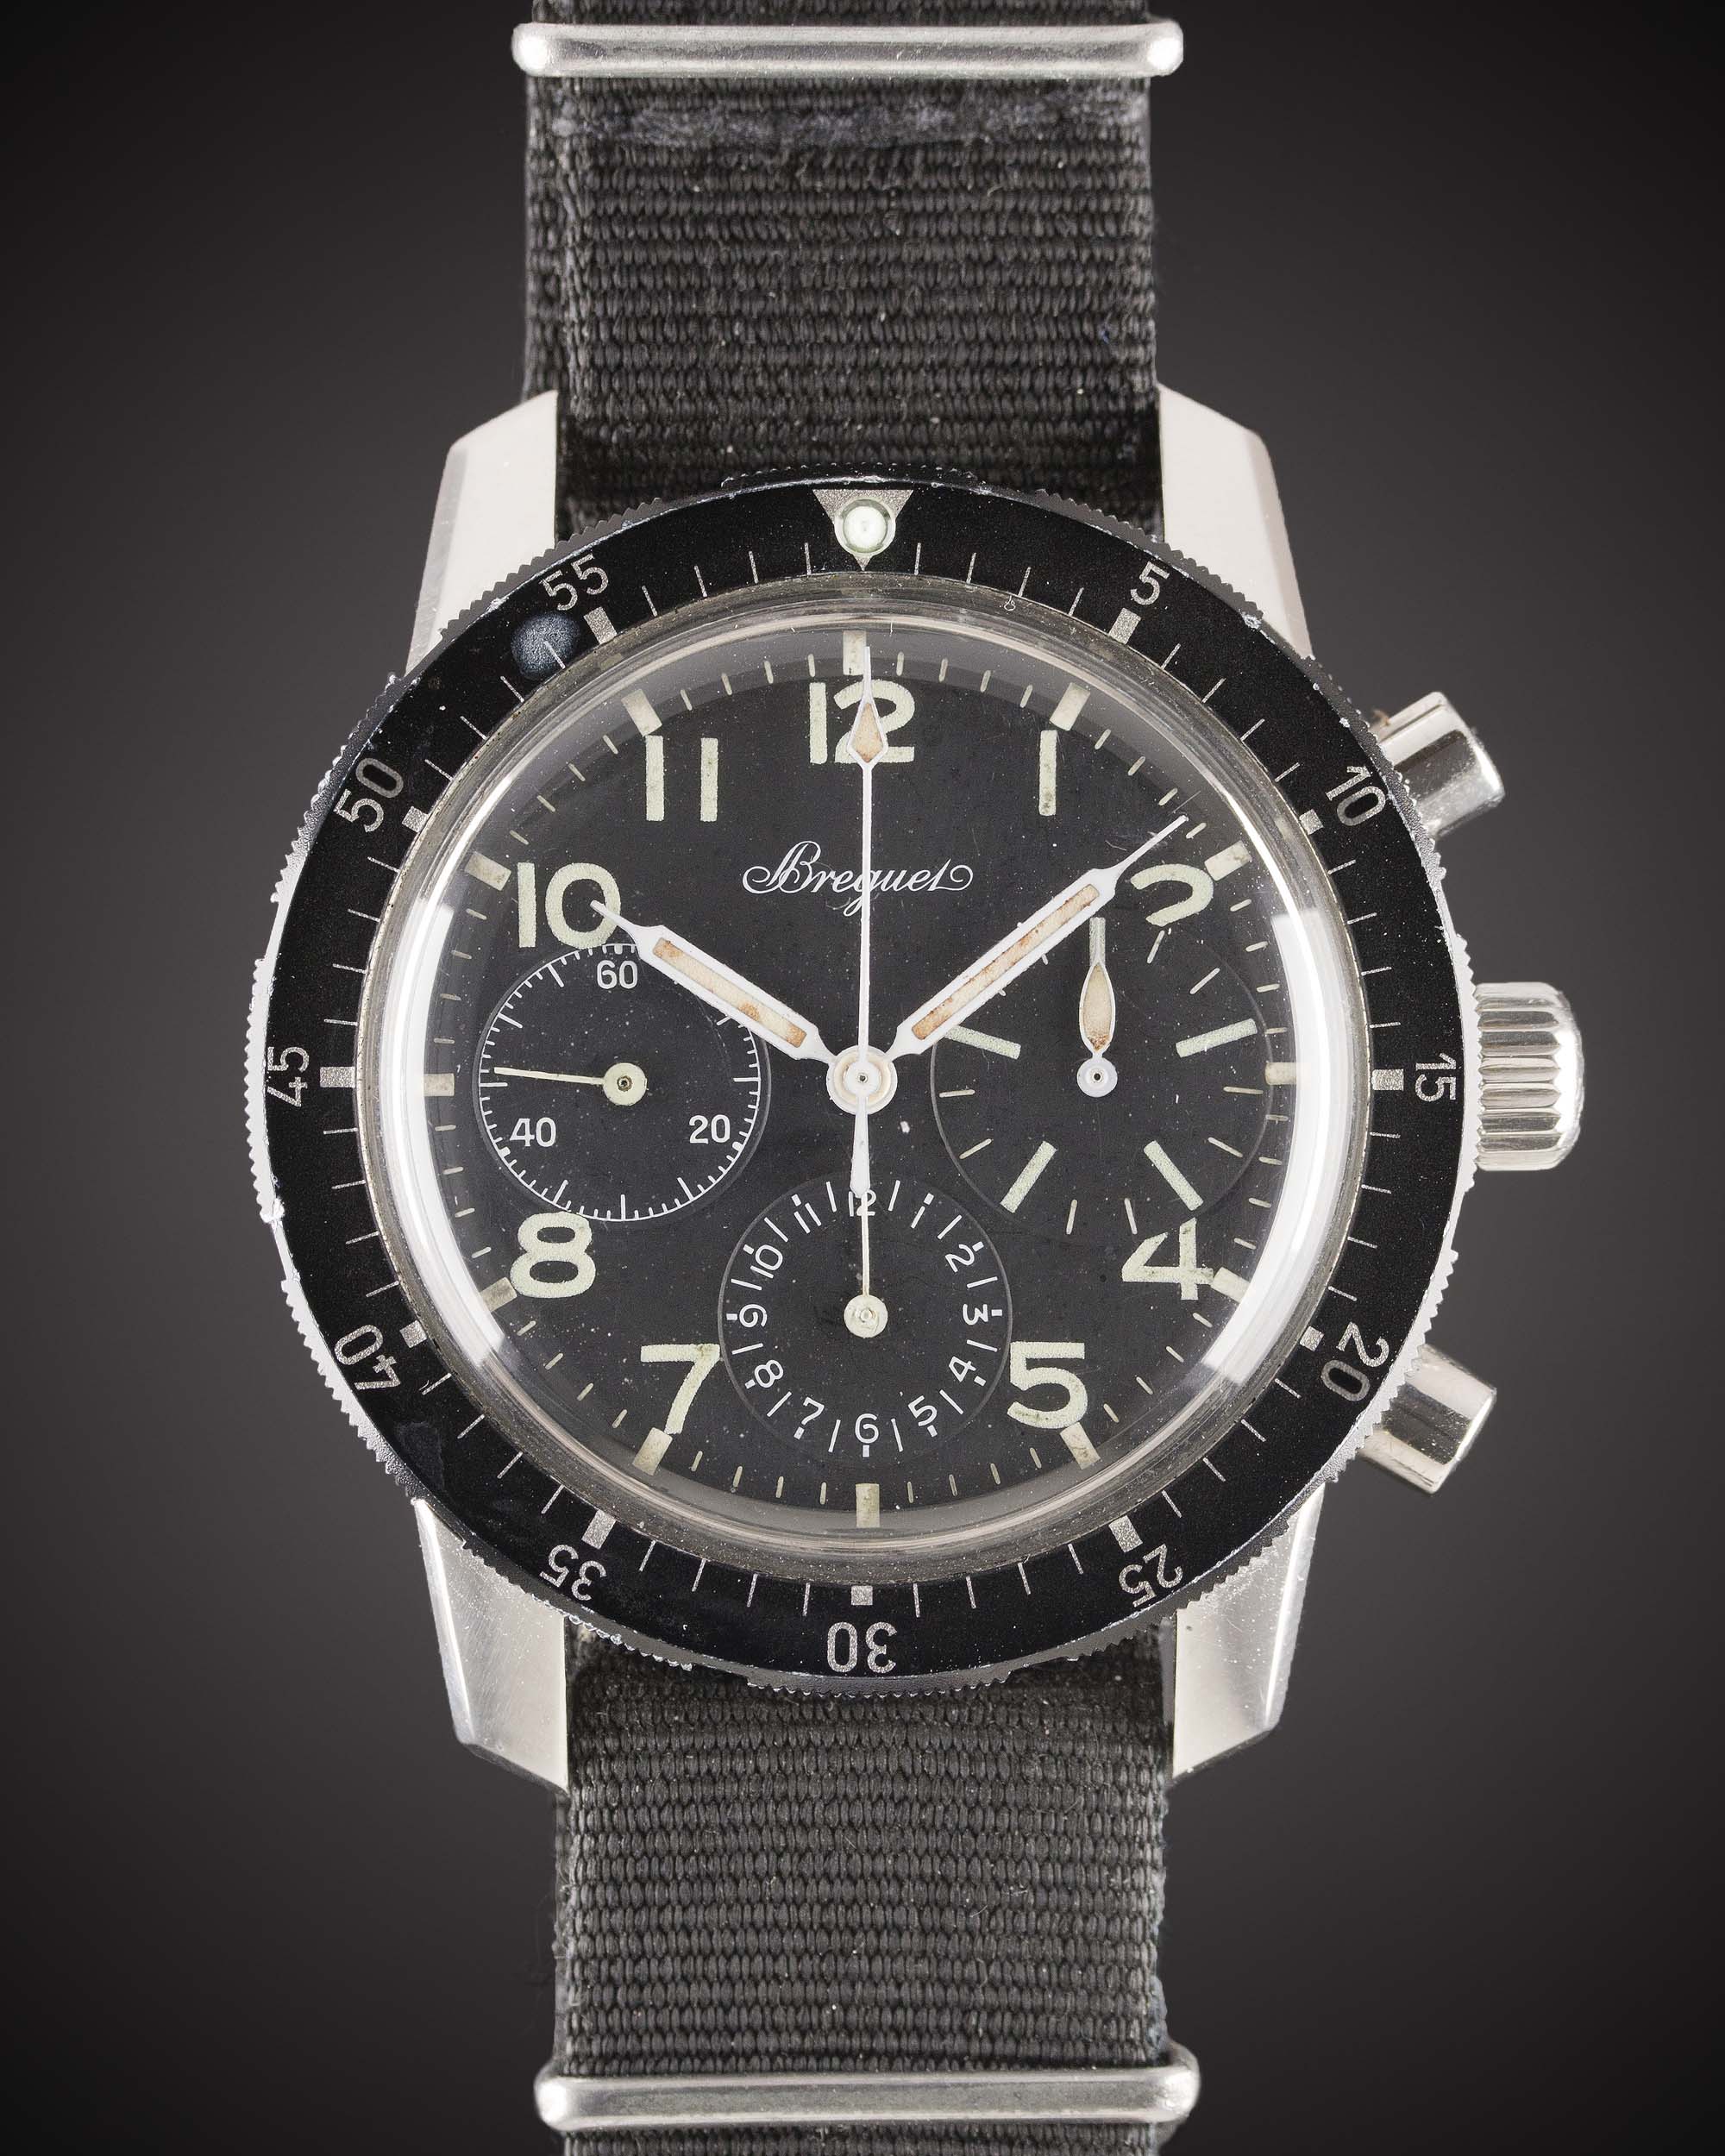 A RARE GENTLEMAN'S STAINLESS STEEL BREGUET TYPE XX FLYBACK CHRONOGRAPH PILOTS WRIST WATCH CIRCA - Image 2 of 11